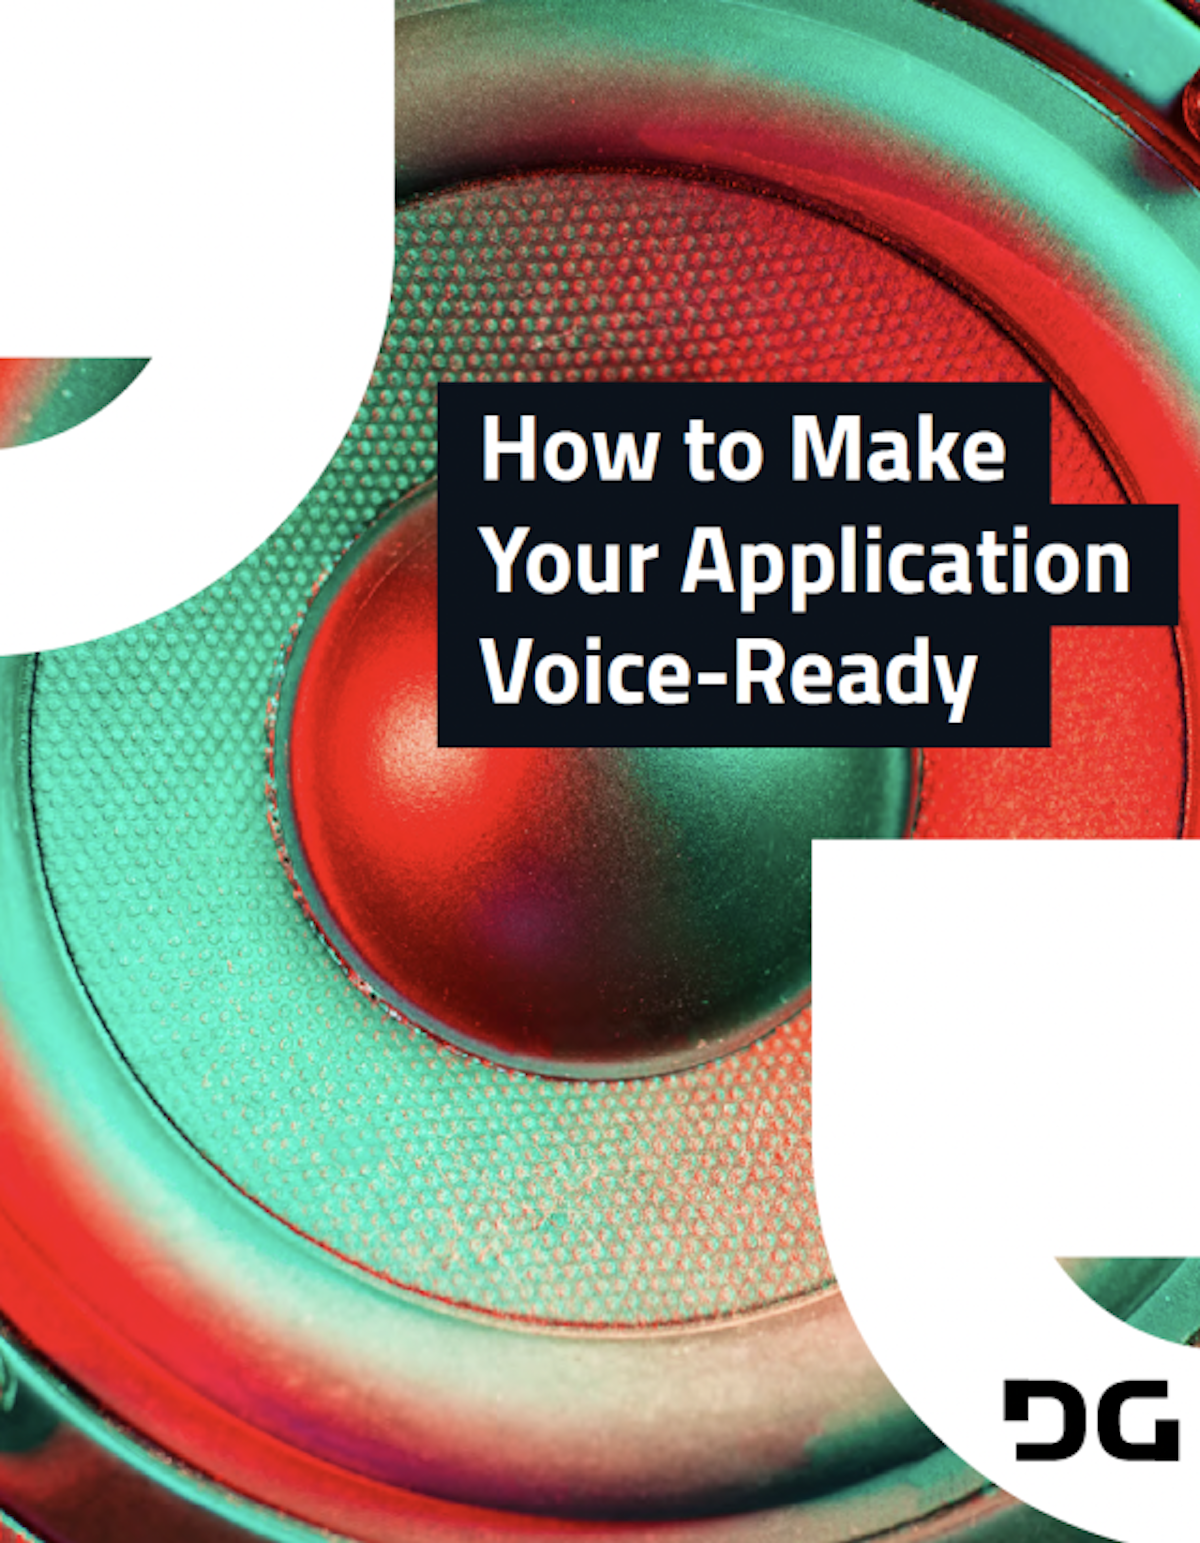 How to Make Your Application Voice-Ready